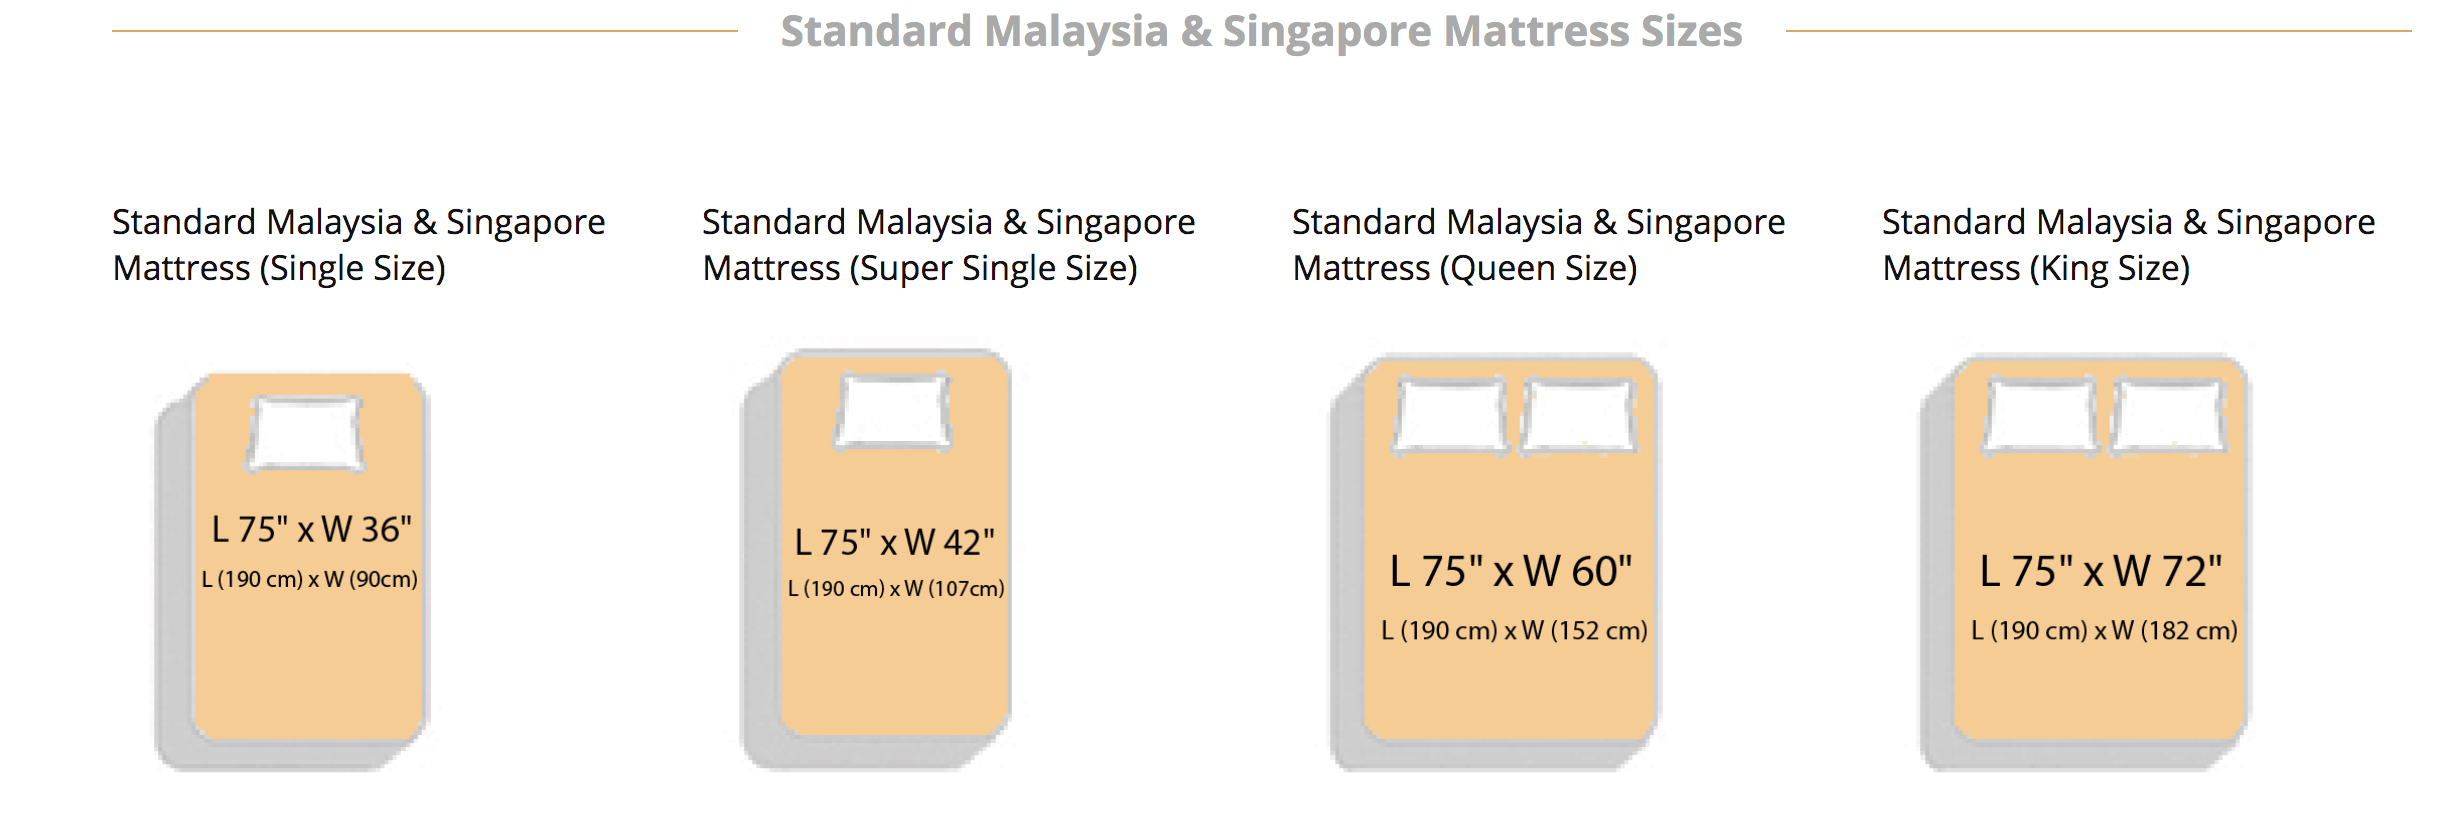 queen size mattress malaysia price